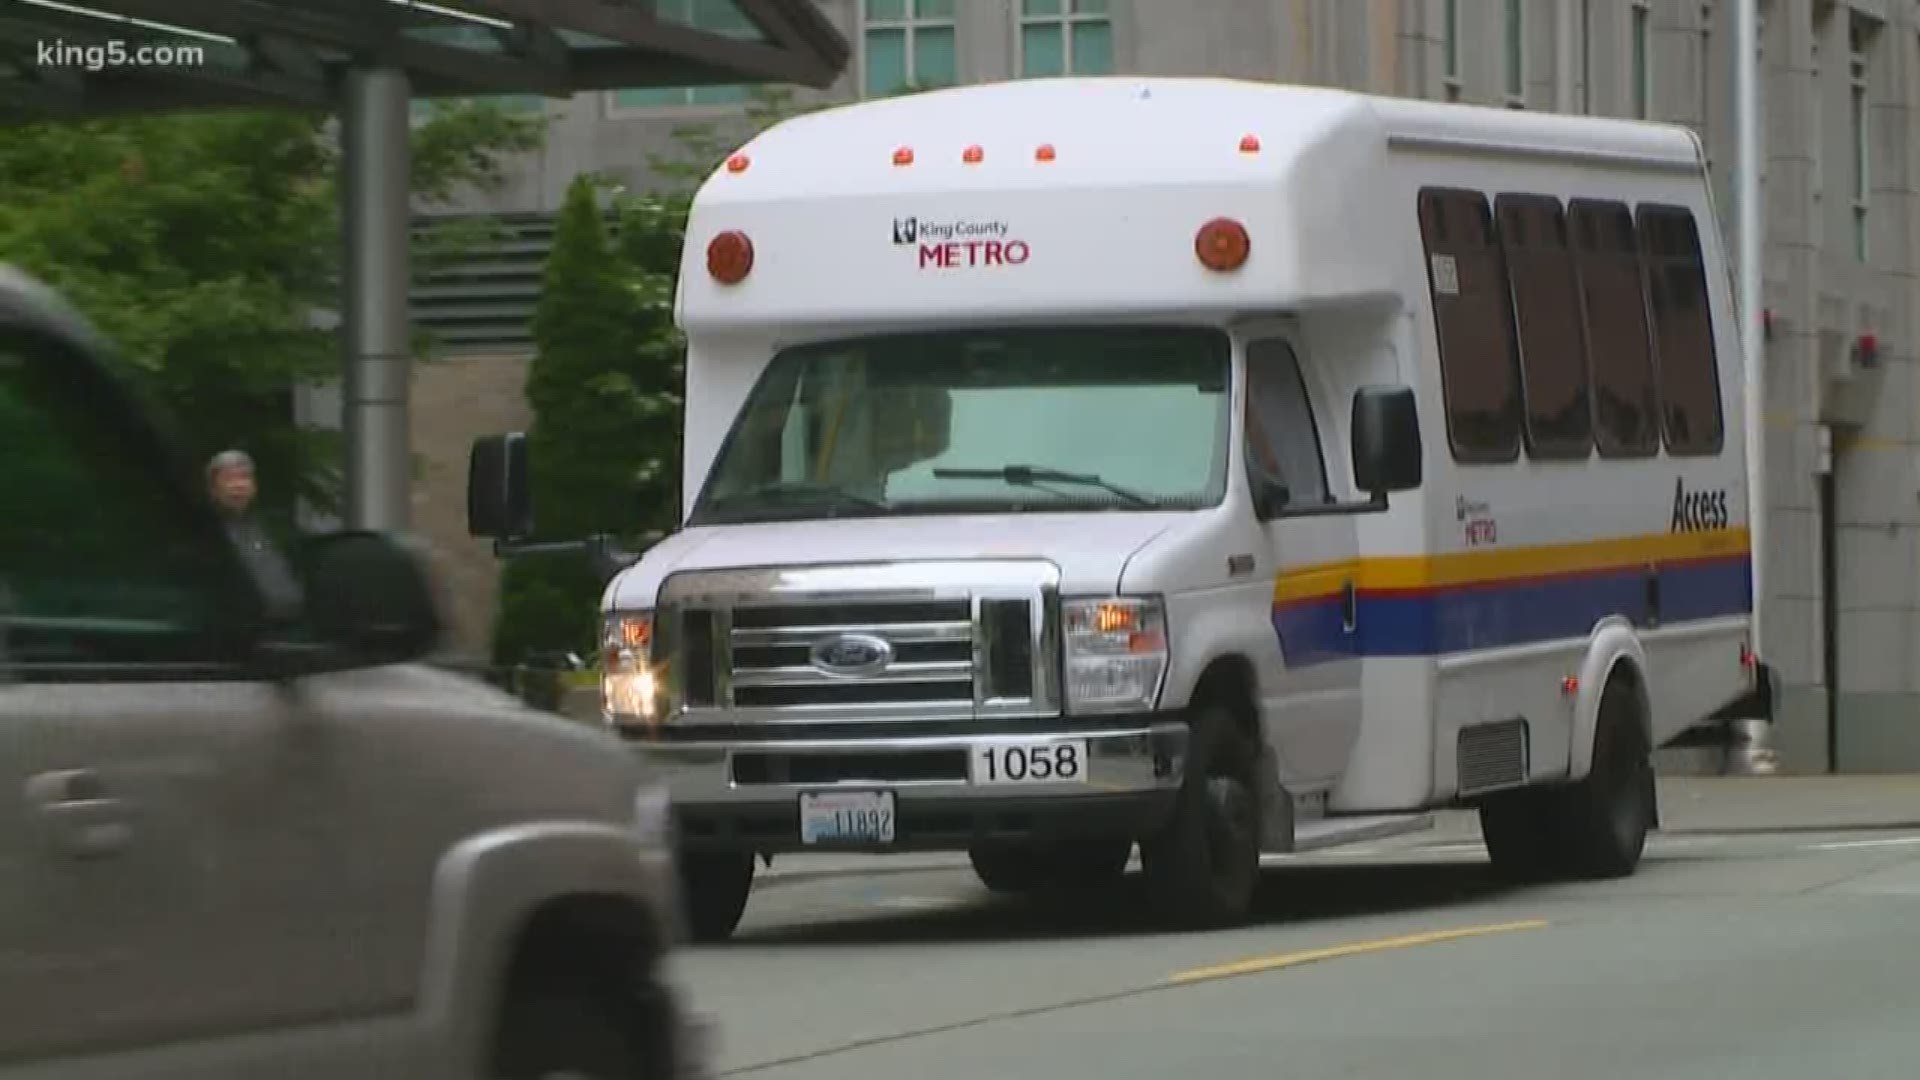 King County Metro says much-needed changes are coming to Metro Access, a bus service for people with disabilities. KING 5's Ted Land reports.